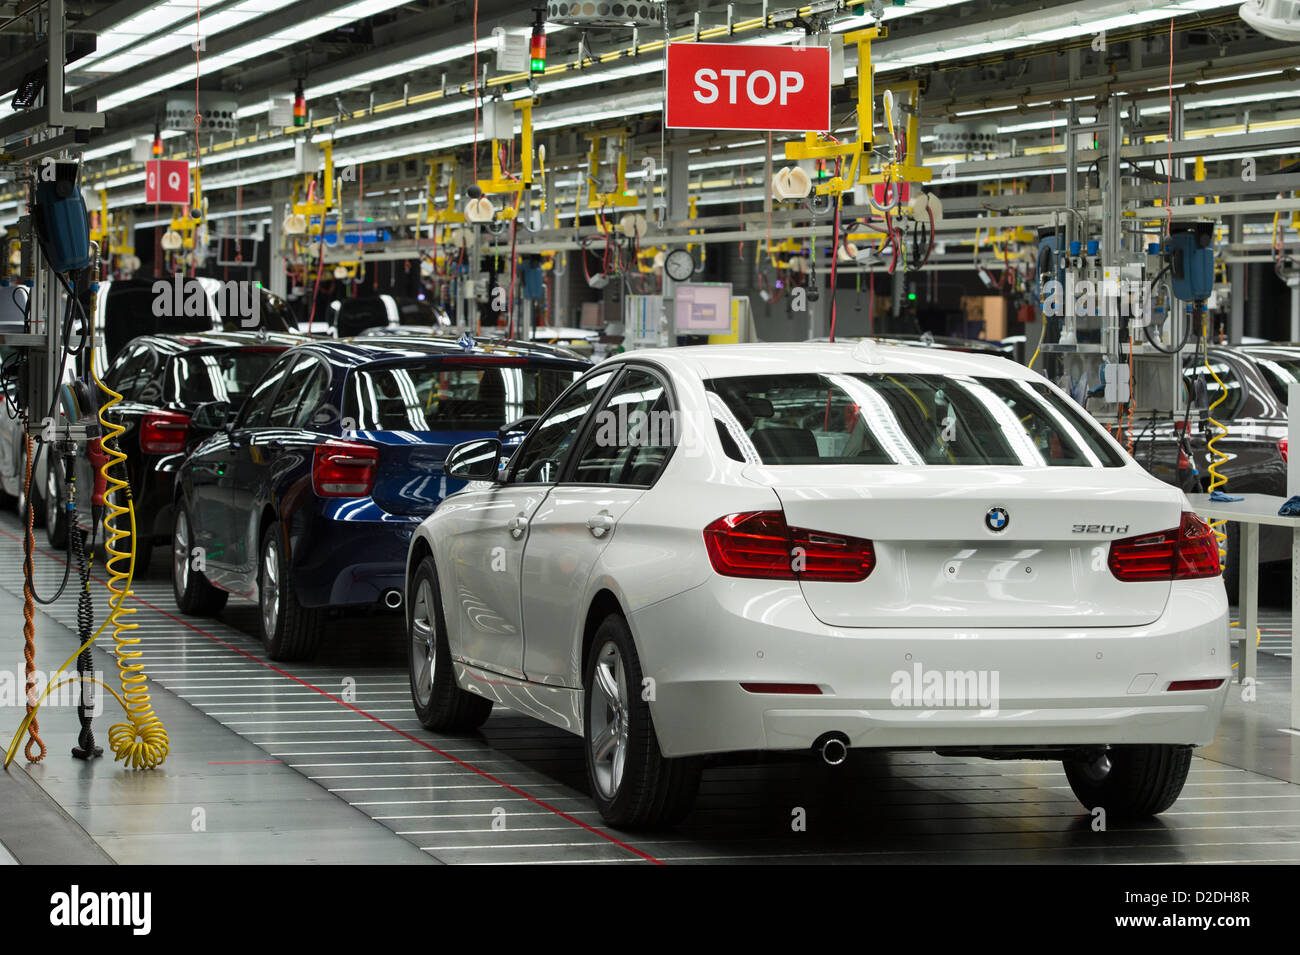 The production lines of the BMW factory in Regensburg are standing still on Thursday evening, 28 June 2012, during the European Championships semi finals between Germany and Italy. About 2,500 employees of the BMW factory in Regensburg can watch the semi finals, which are screened on three big screens in the factory during the late shift. Stock Photo